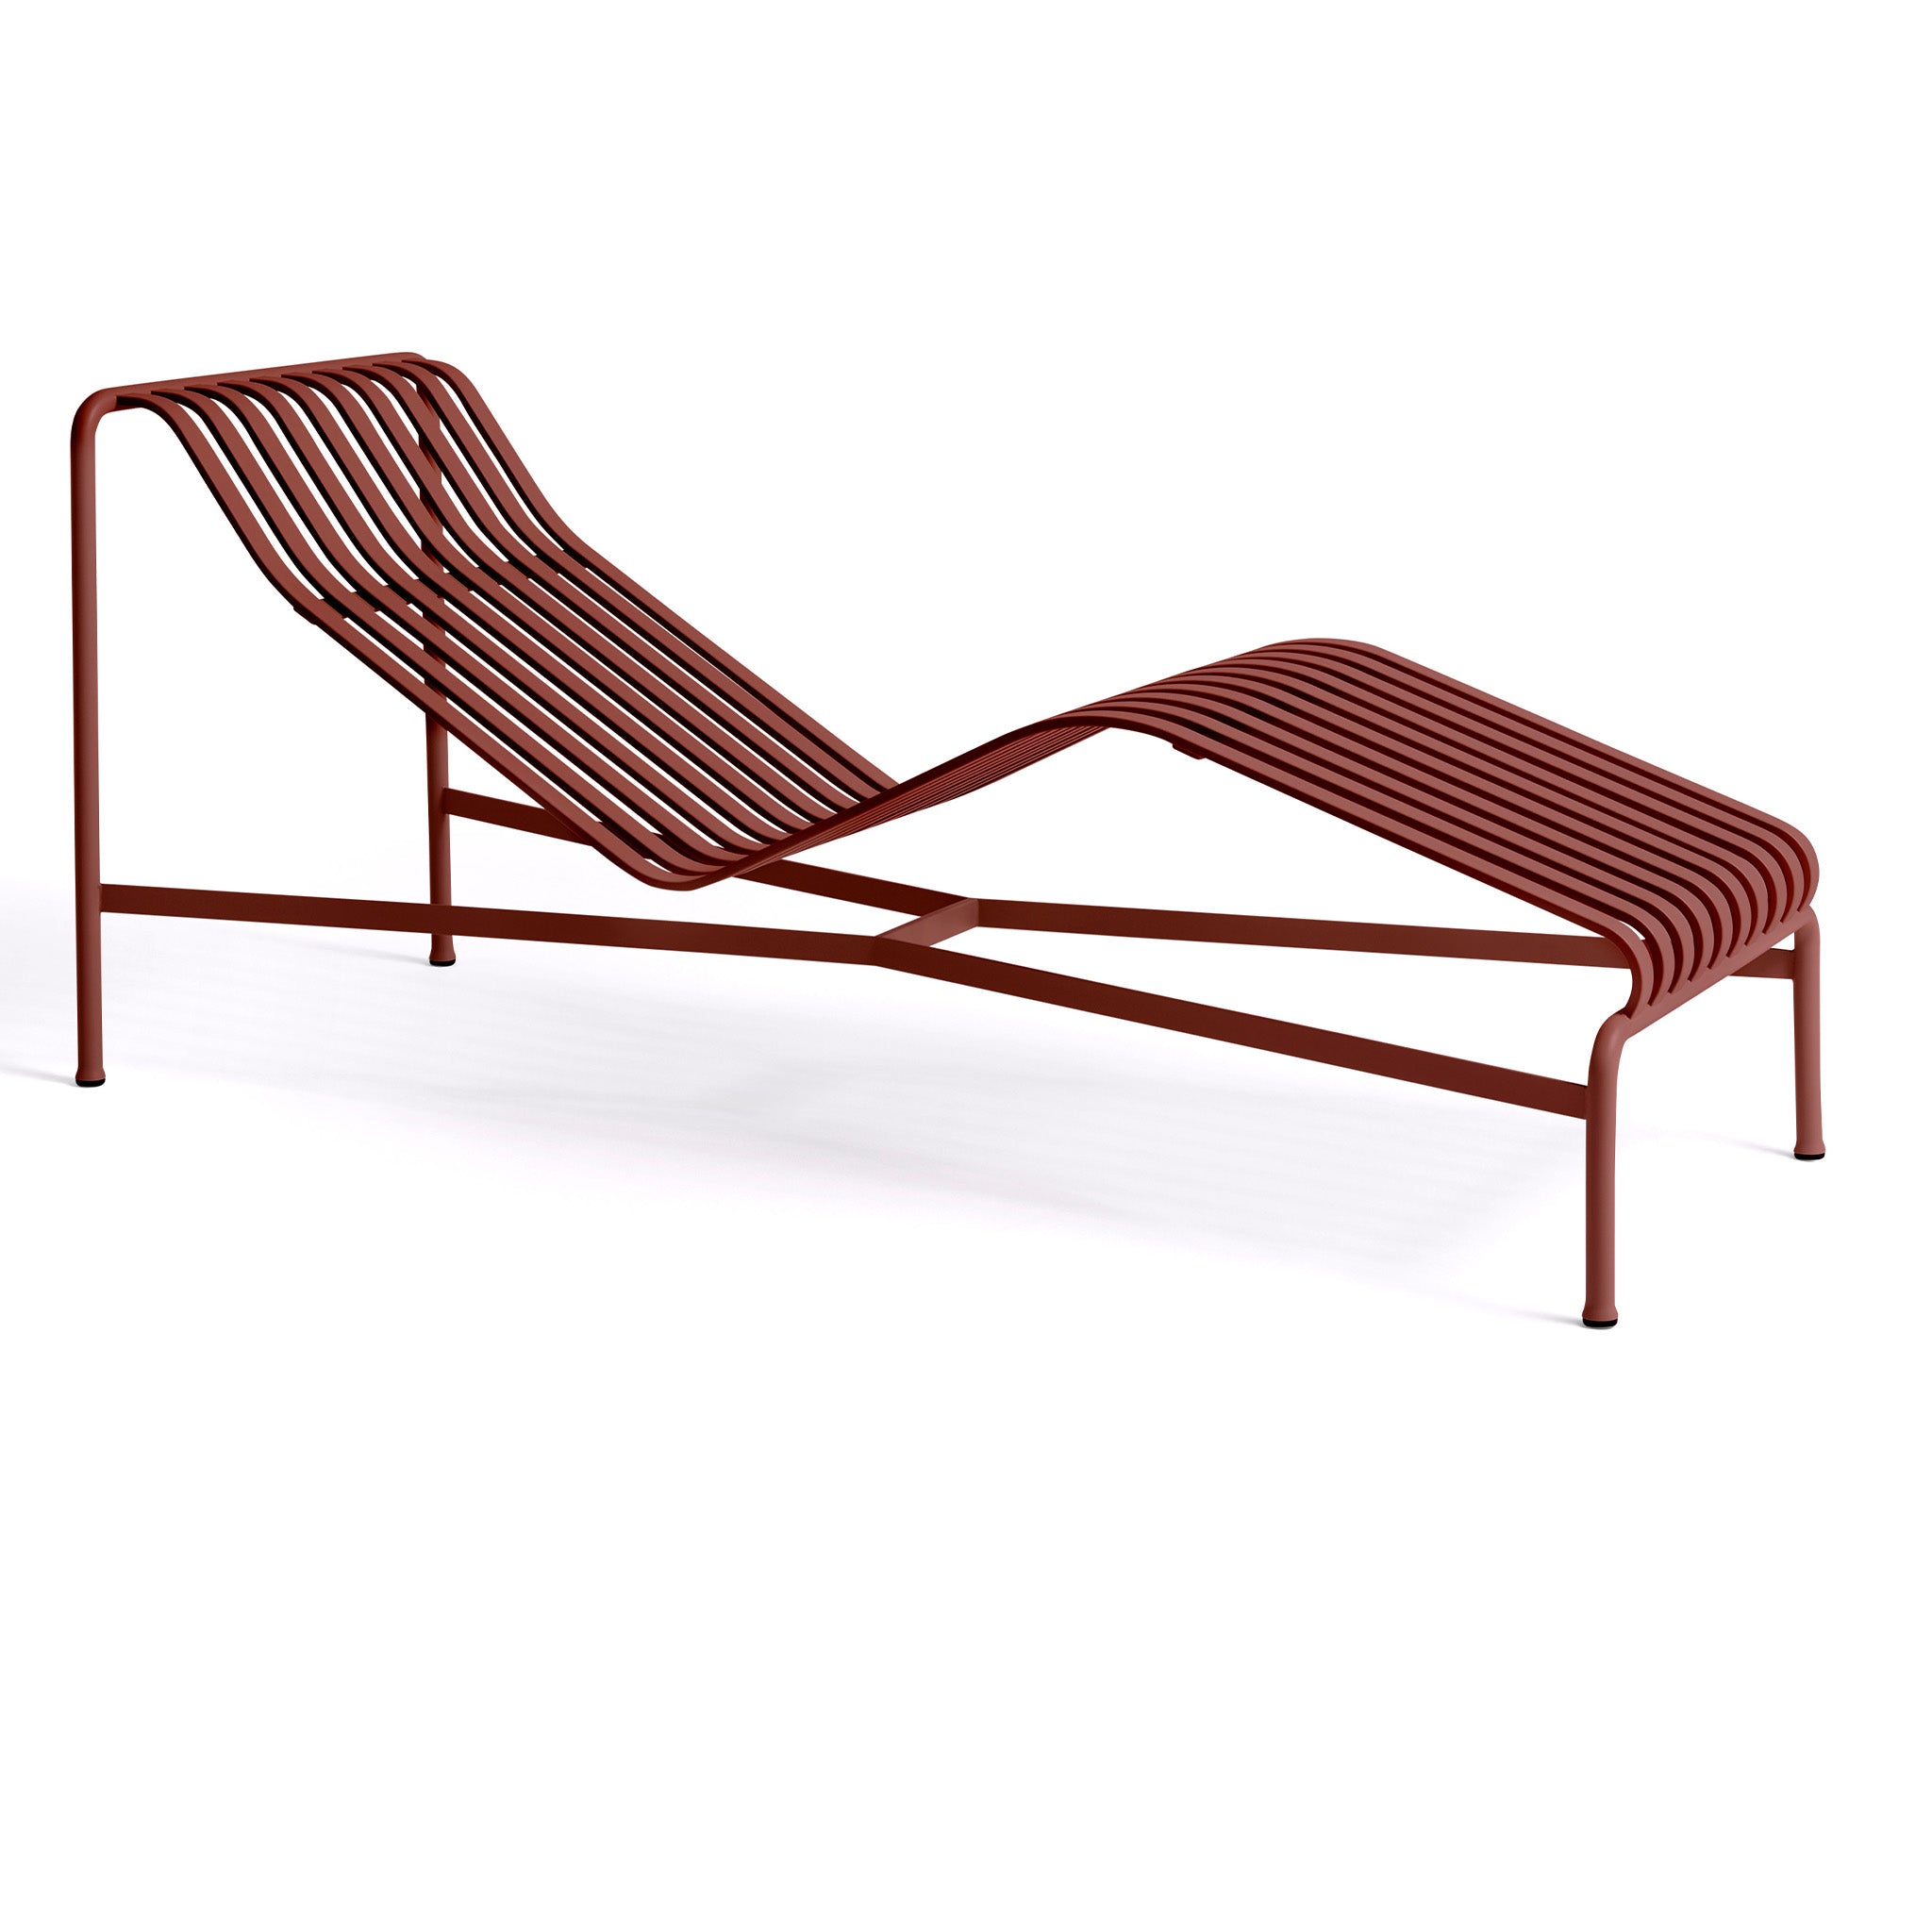 Palissade Chaise Longue by Hay